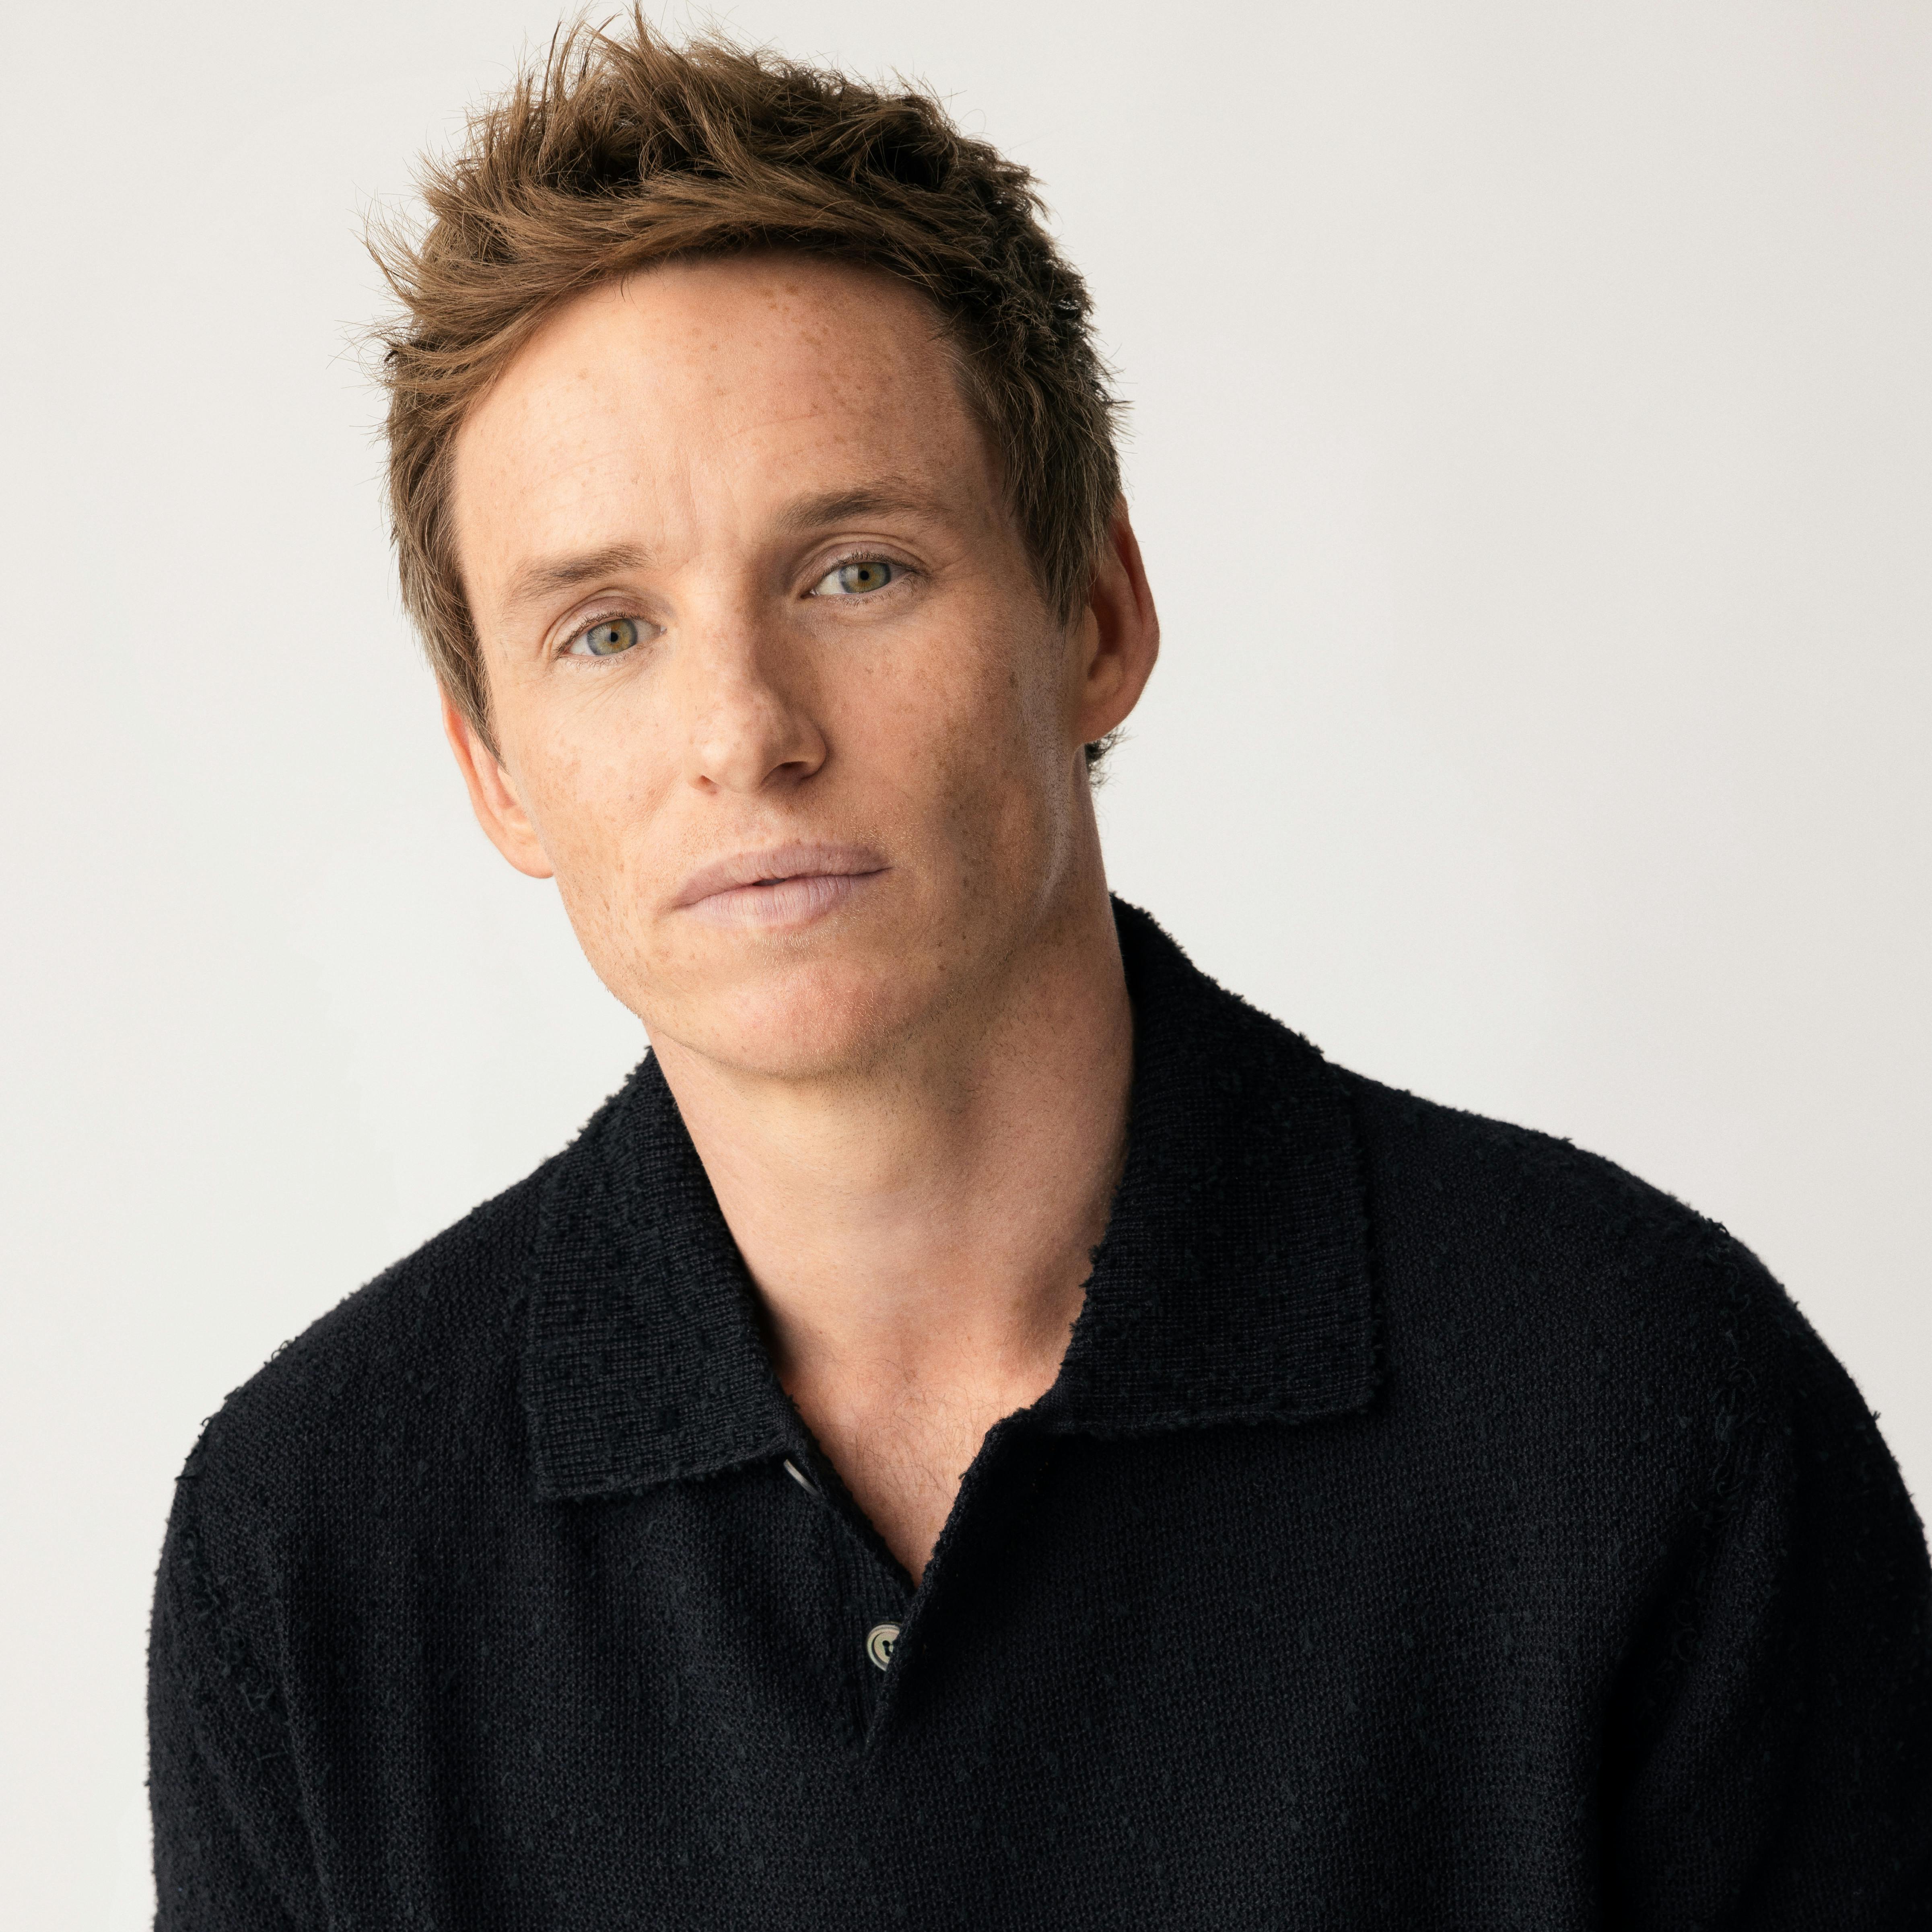 Eddie Redmayne wears a dark shirt and poses against a white background.